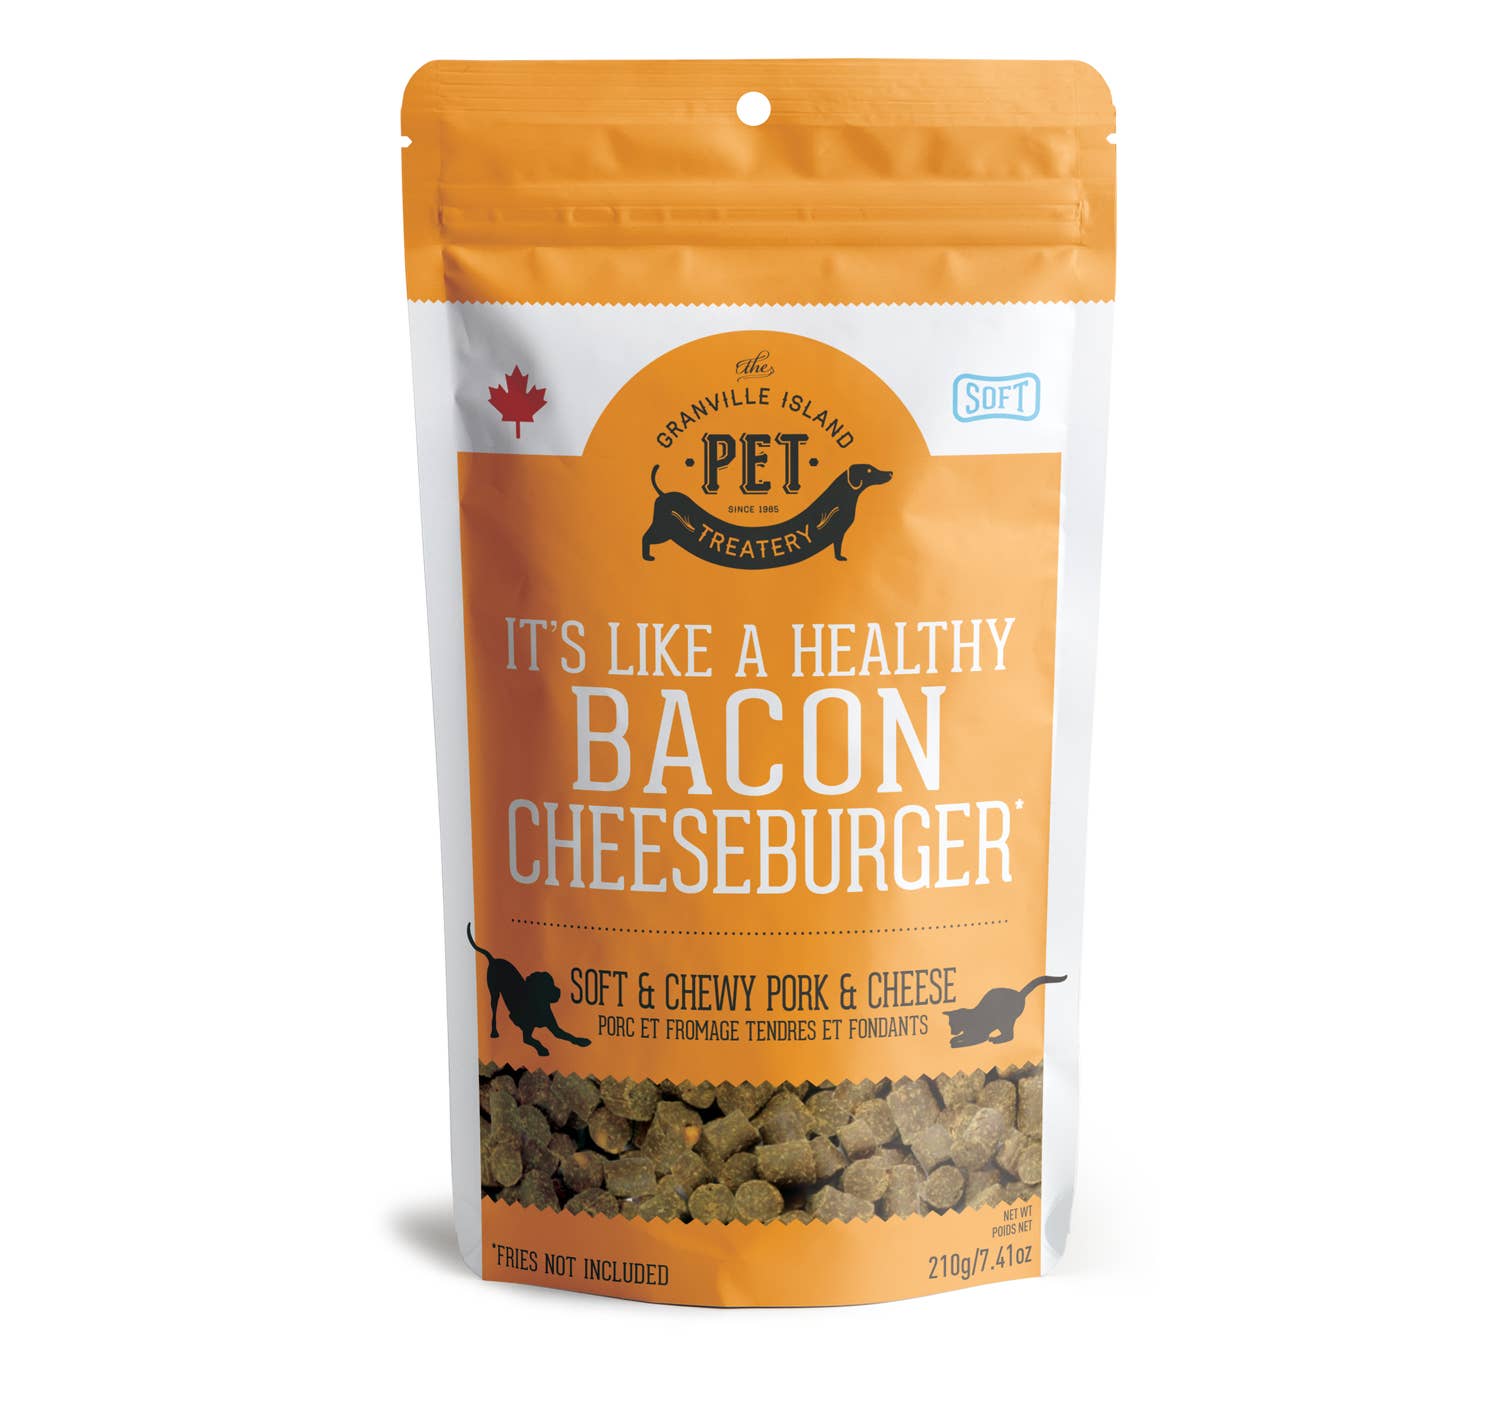 The Granville Island Pet Treatery - It's Like a Healthy Bacon Cheeseburger (Pork & Cheese)175g